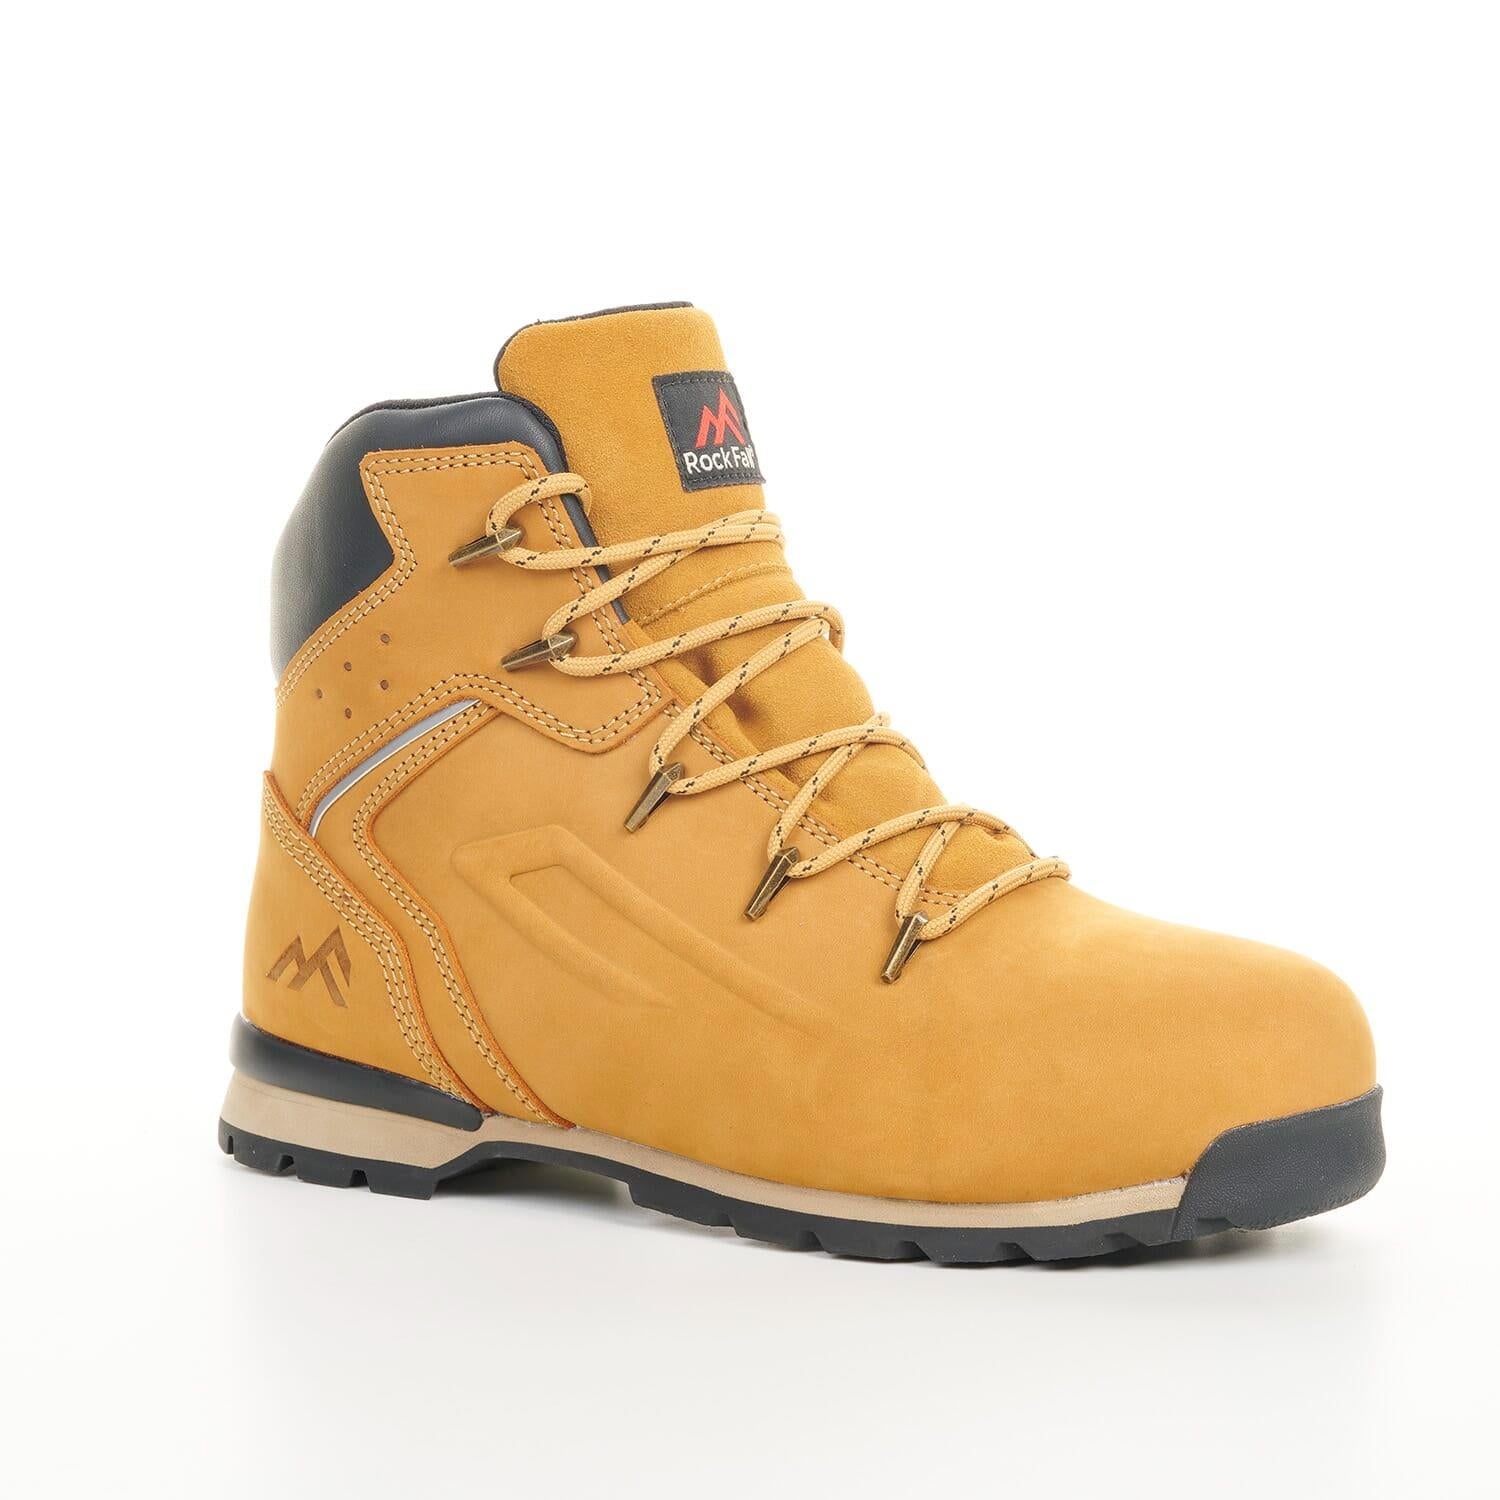 Rock Fall Sable S7 waterproof composite toe/midsole work safety boots #RF370